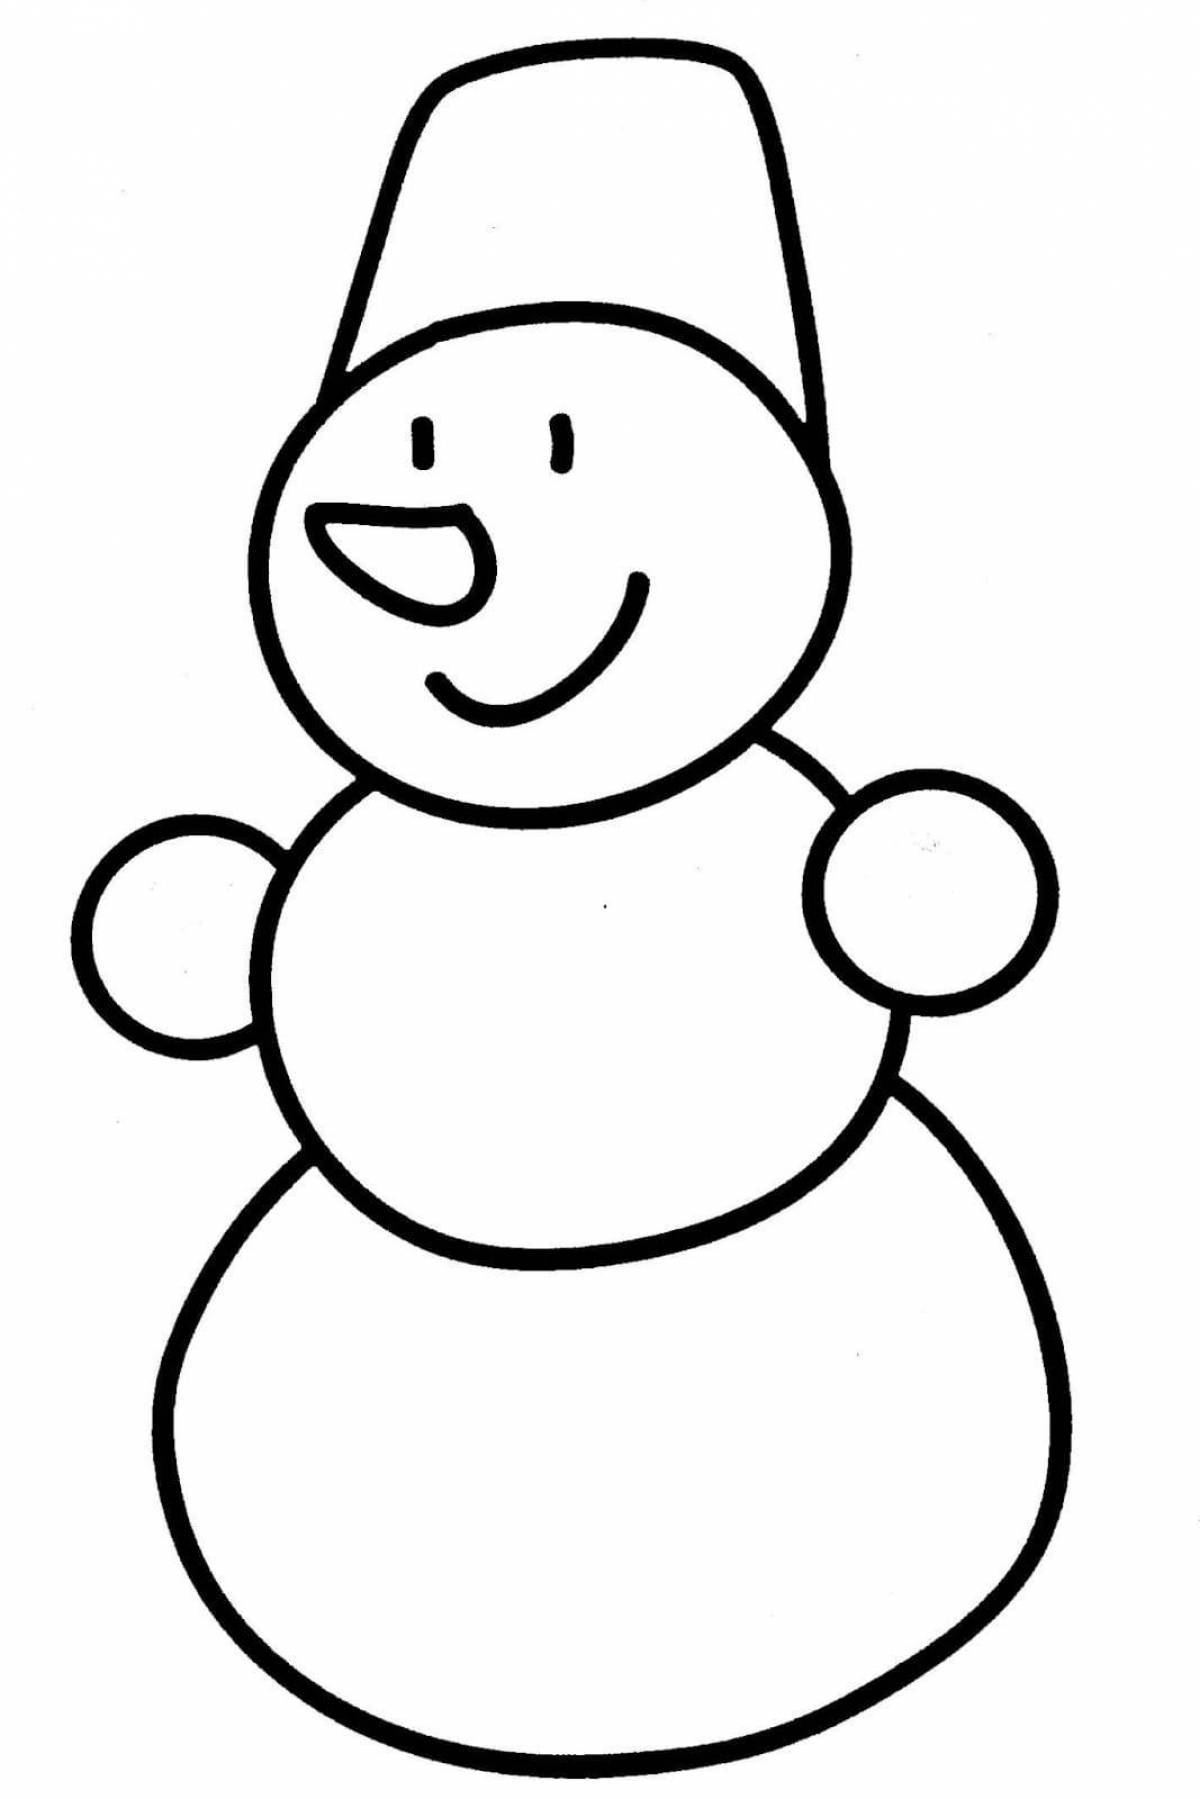 Colorful snowman coloring book